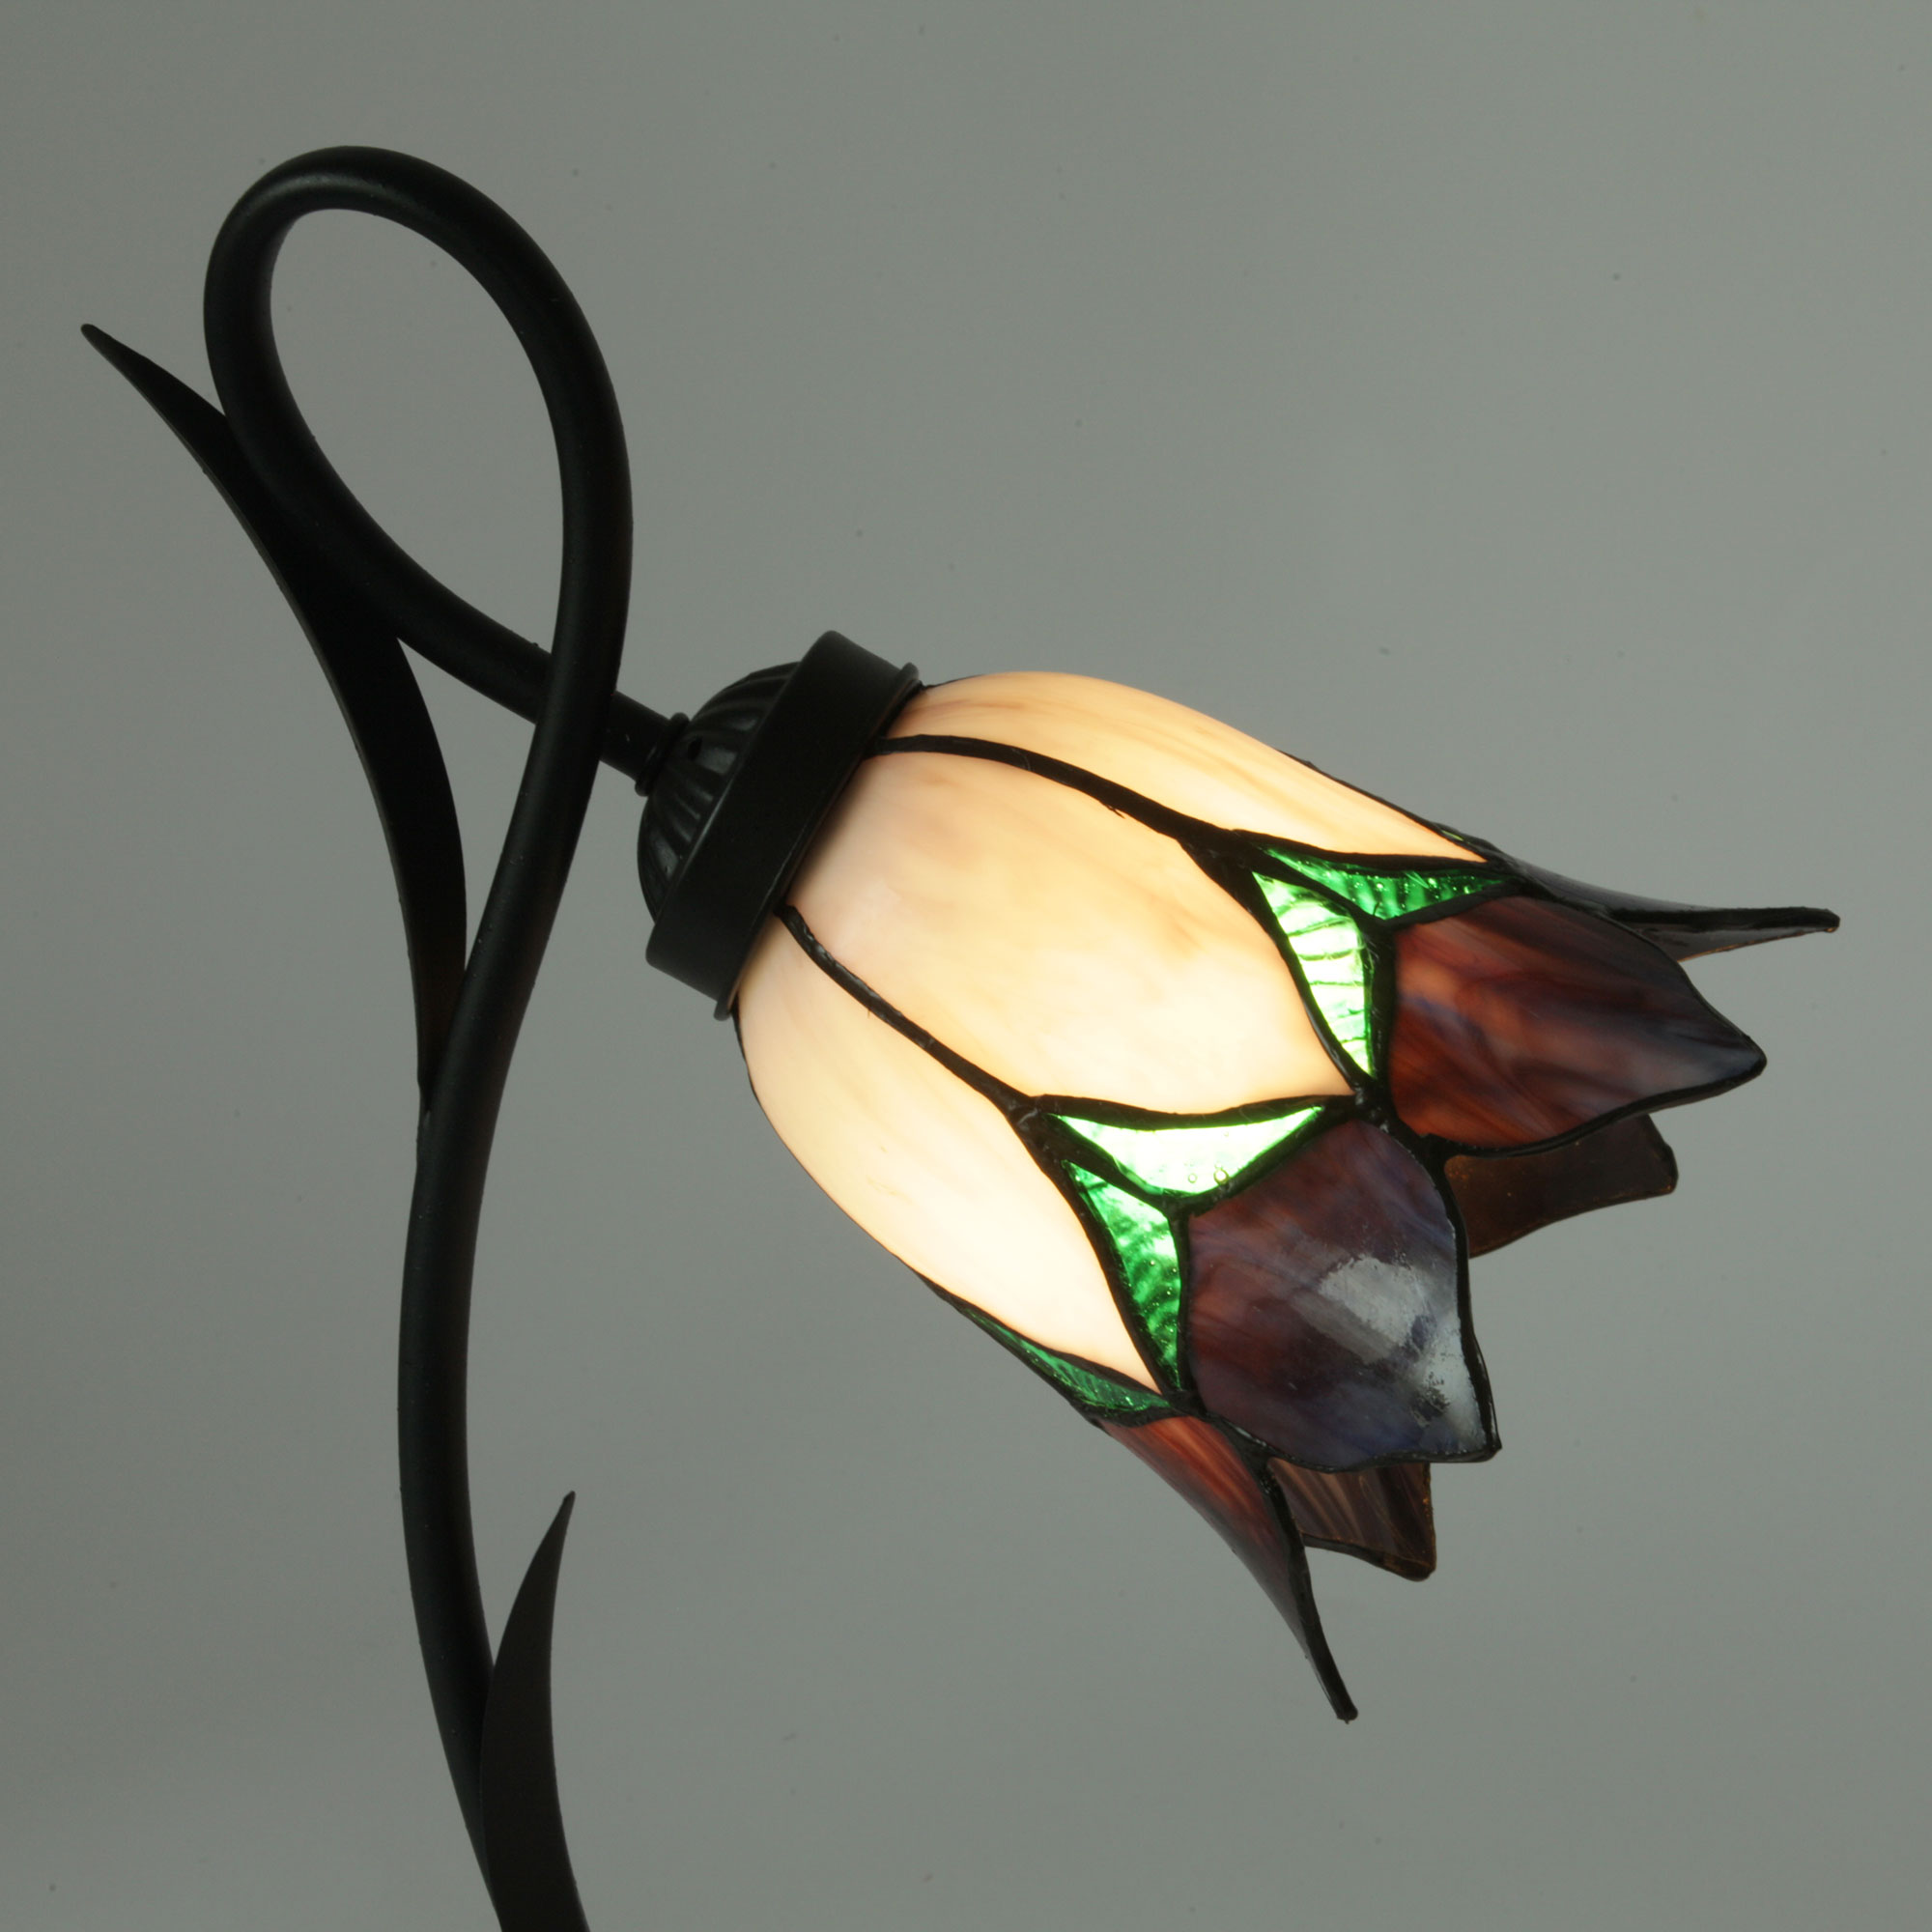 Tiffany table light with purple flower shade, Fig. 5